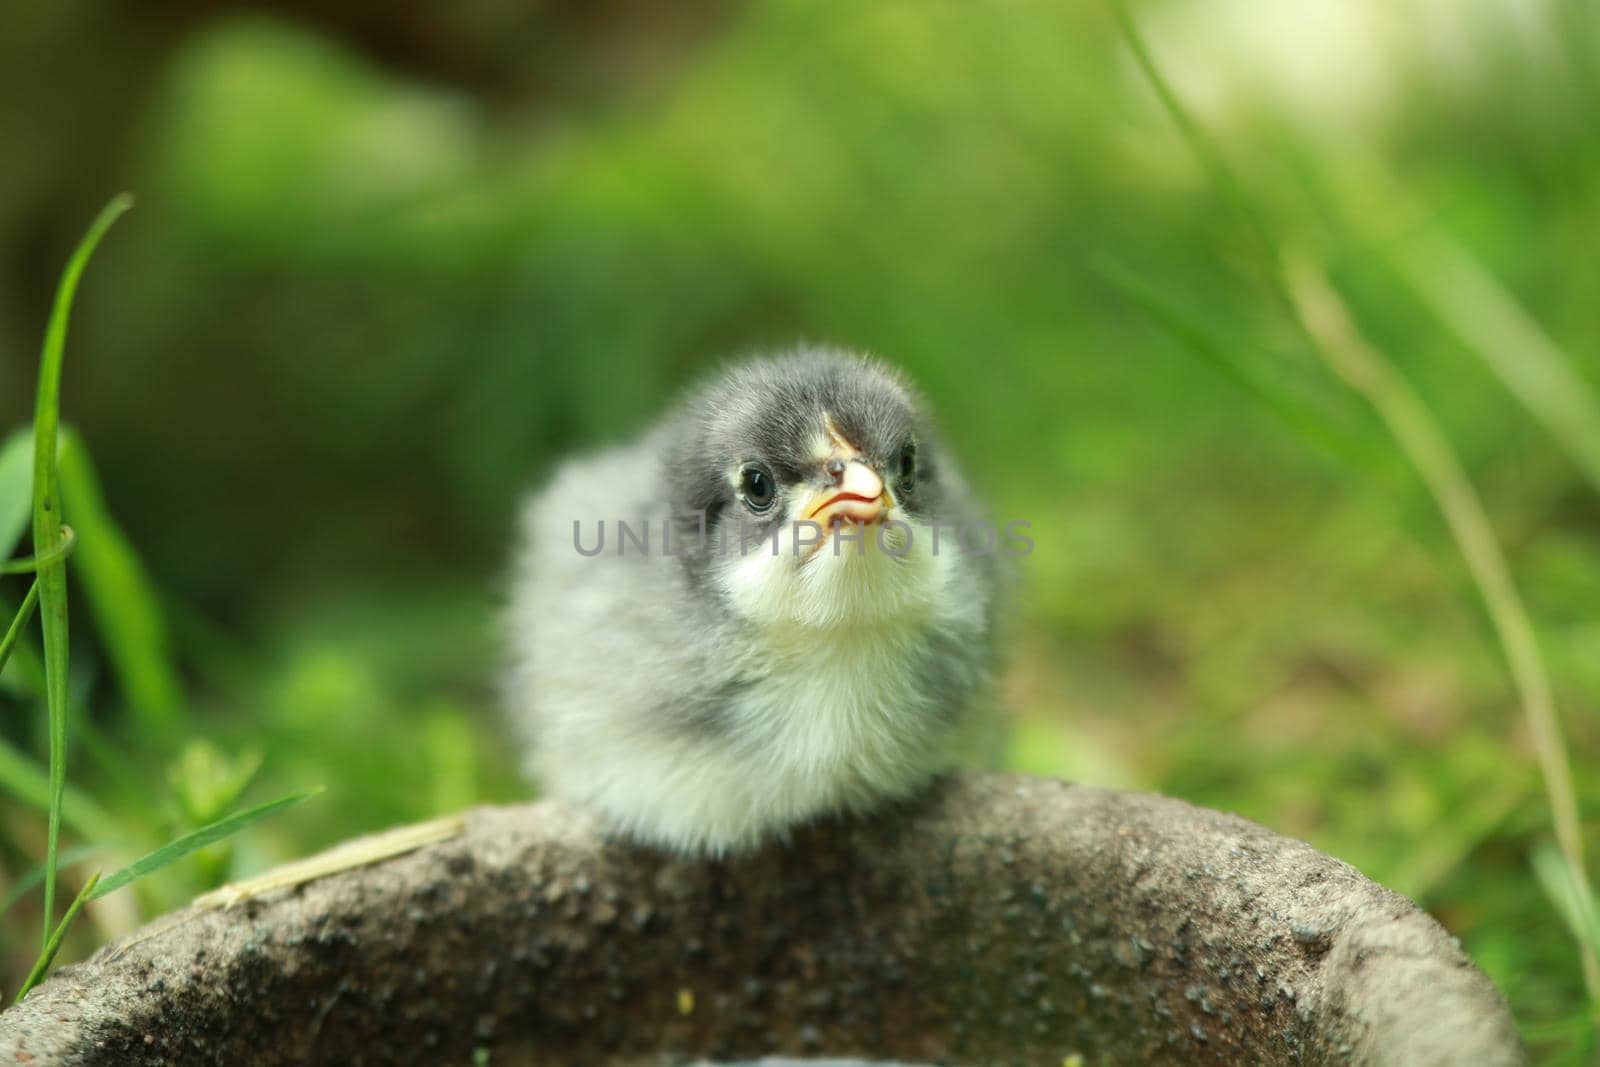 A little young chicken chick sits in the grass